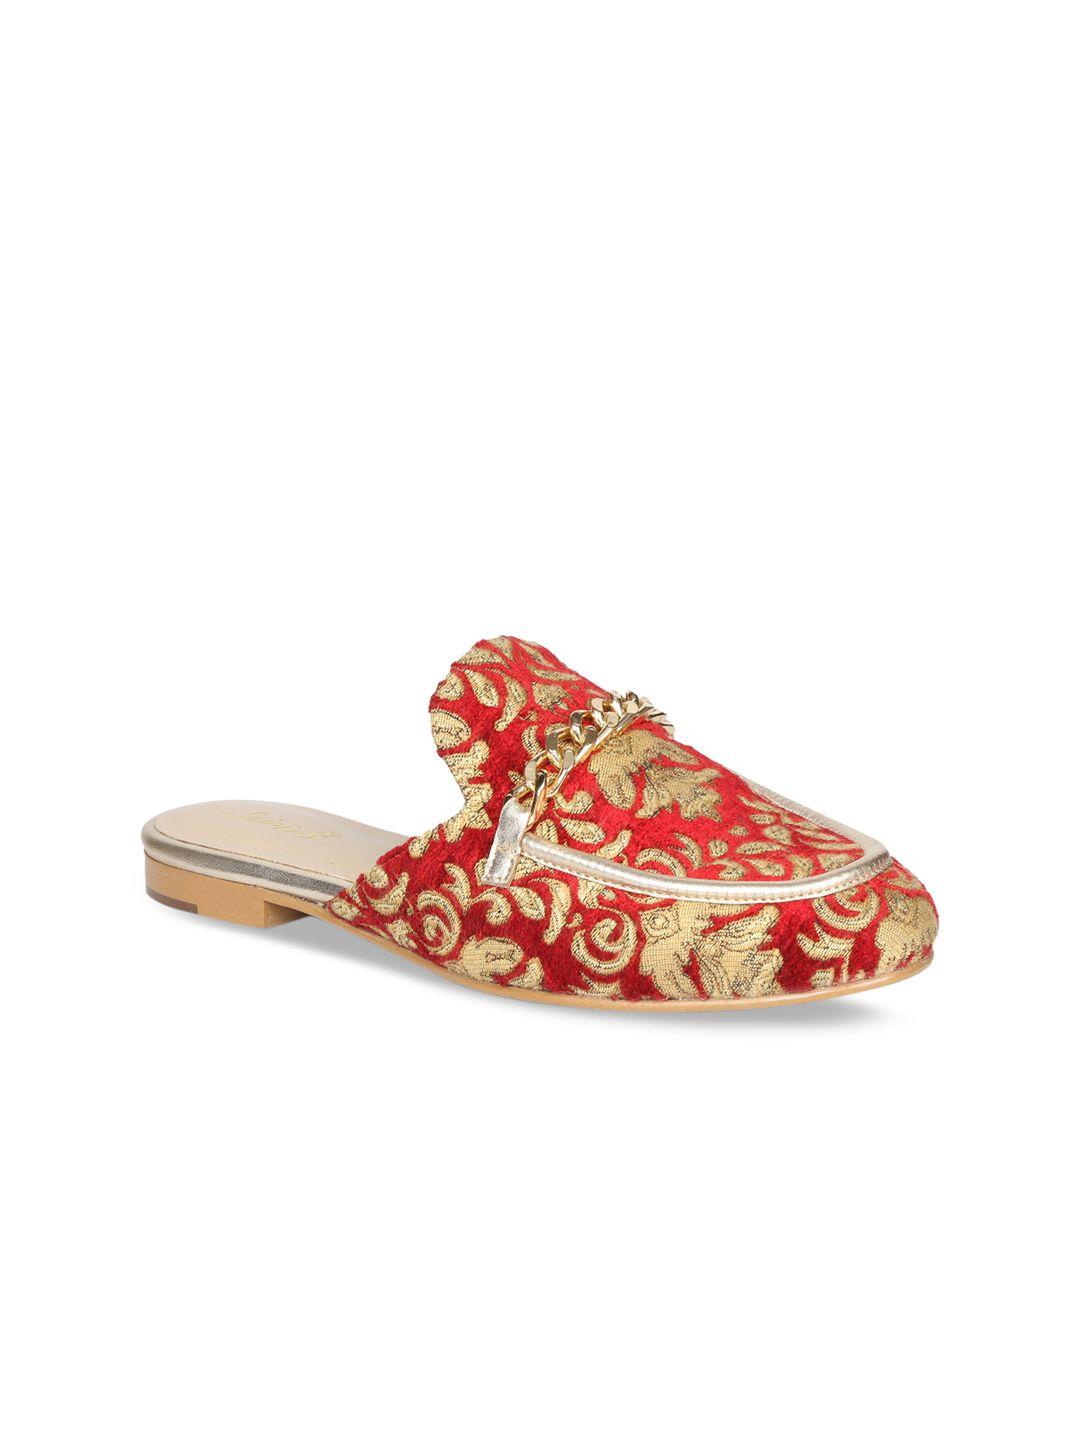 saint-g-women-red-&-gold-toned-woven-design-leather-mules